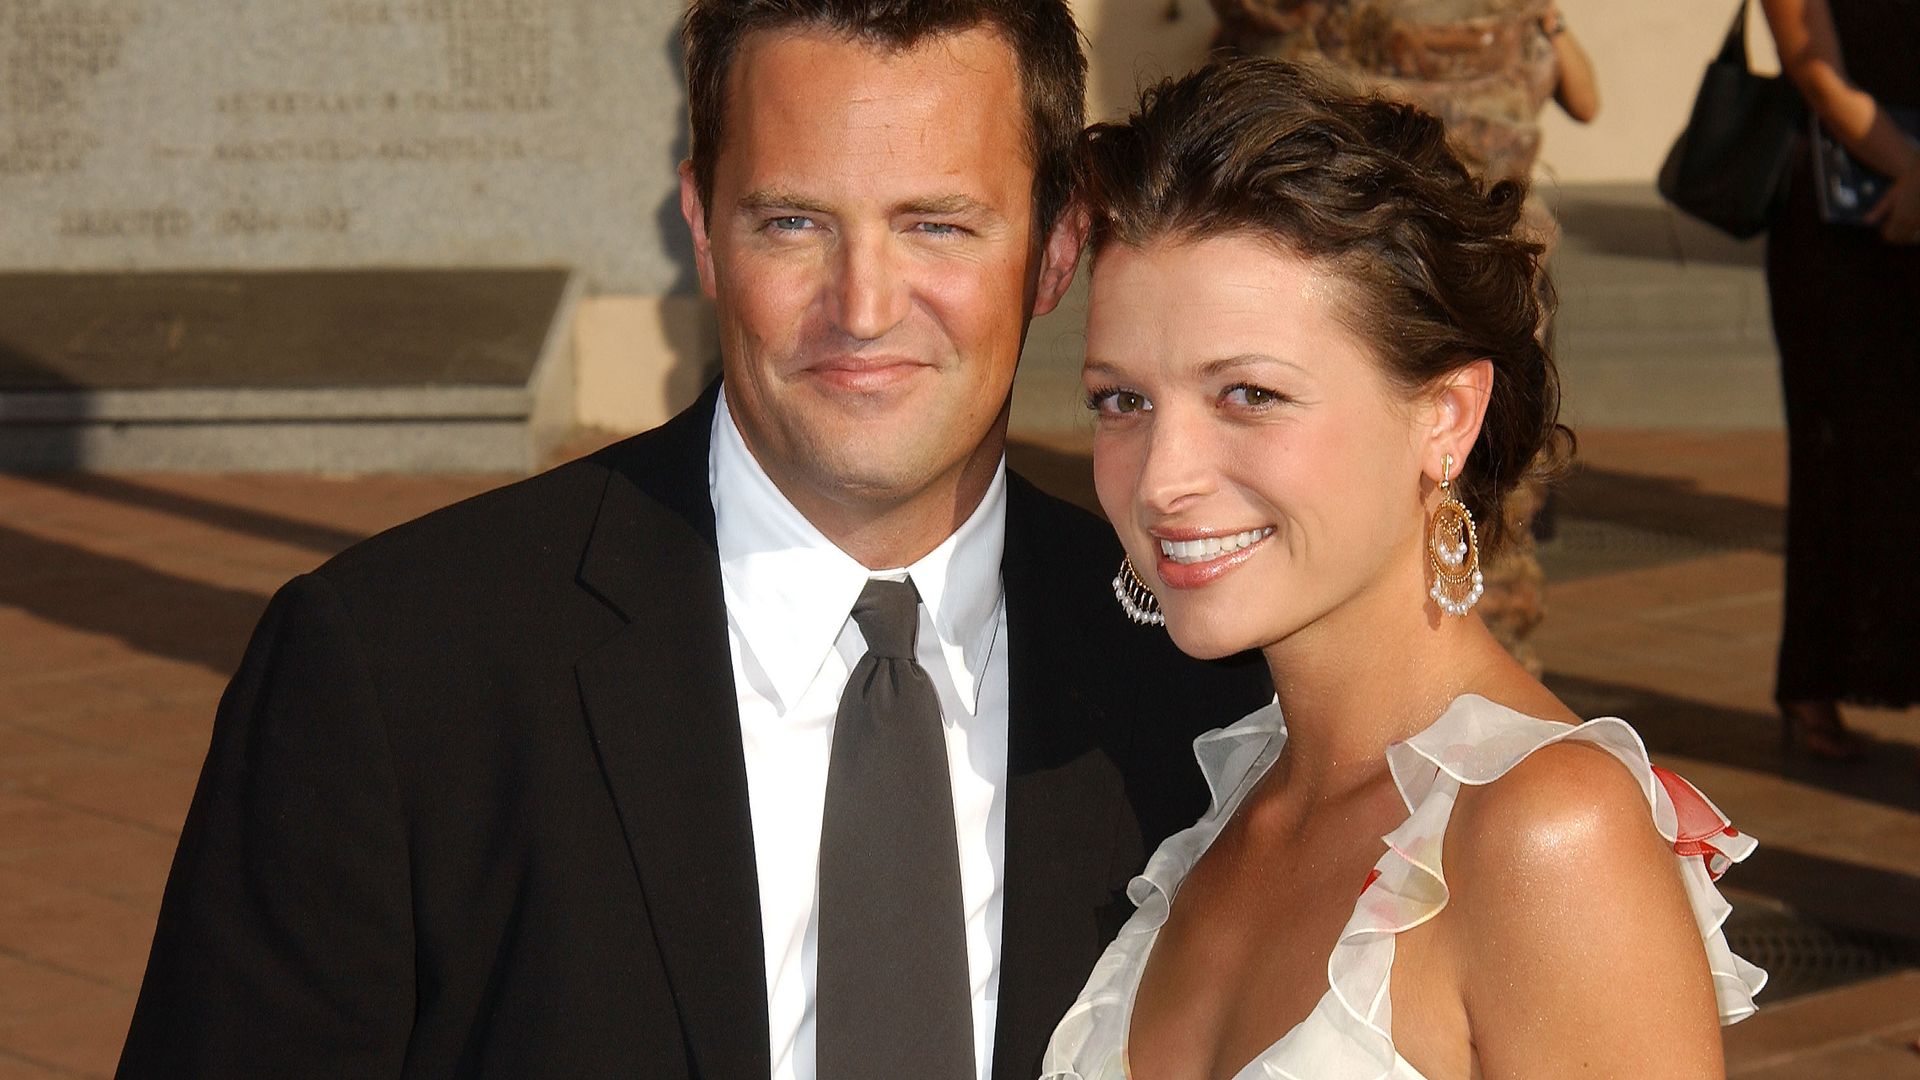 Matthew Perry included one ex-girlfriend in his will - details